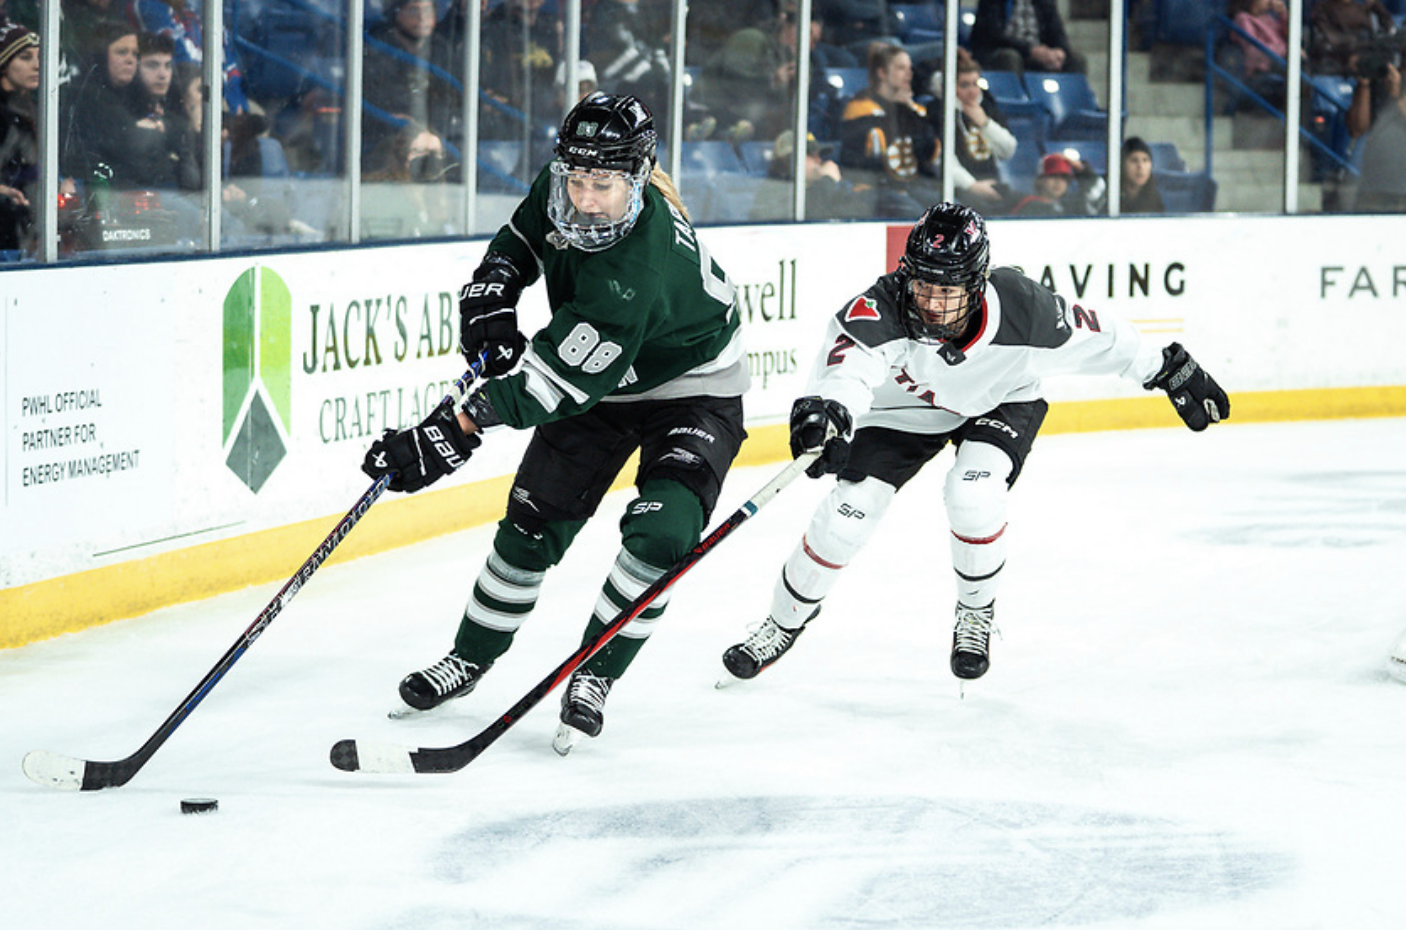 PWHL PREVIEW: Boston Visits Ottawa With Playoff Dreams On the Line